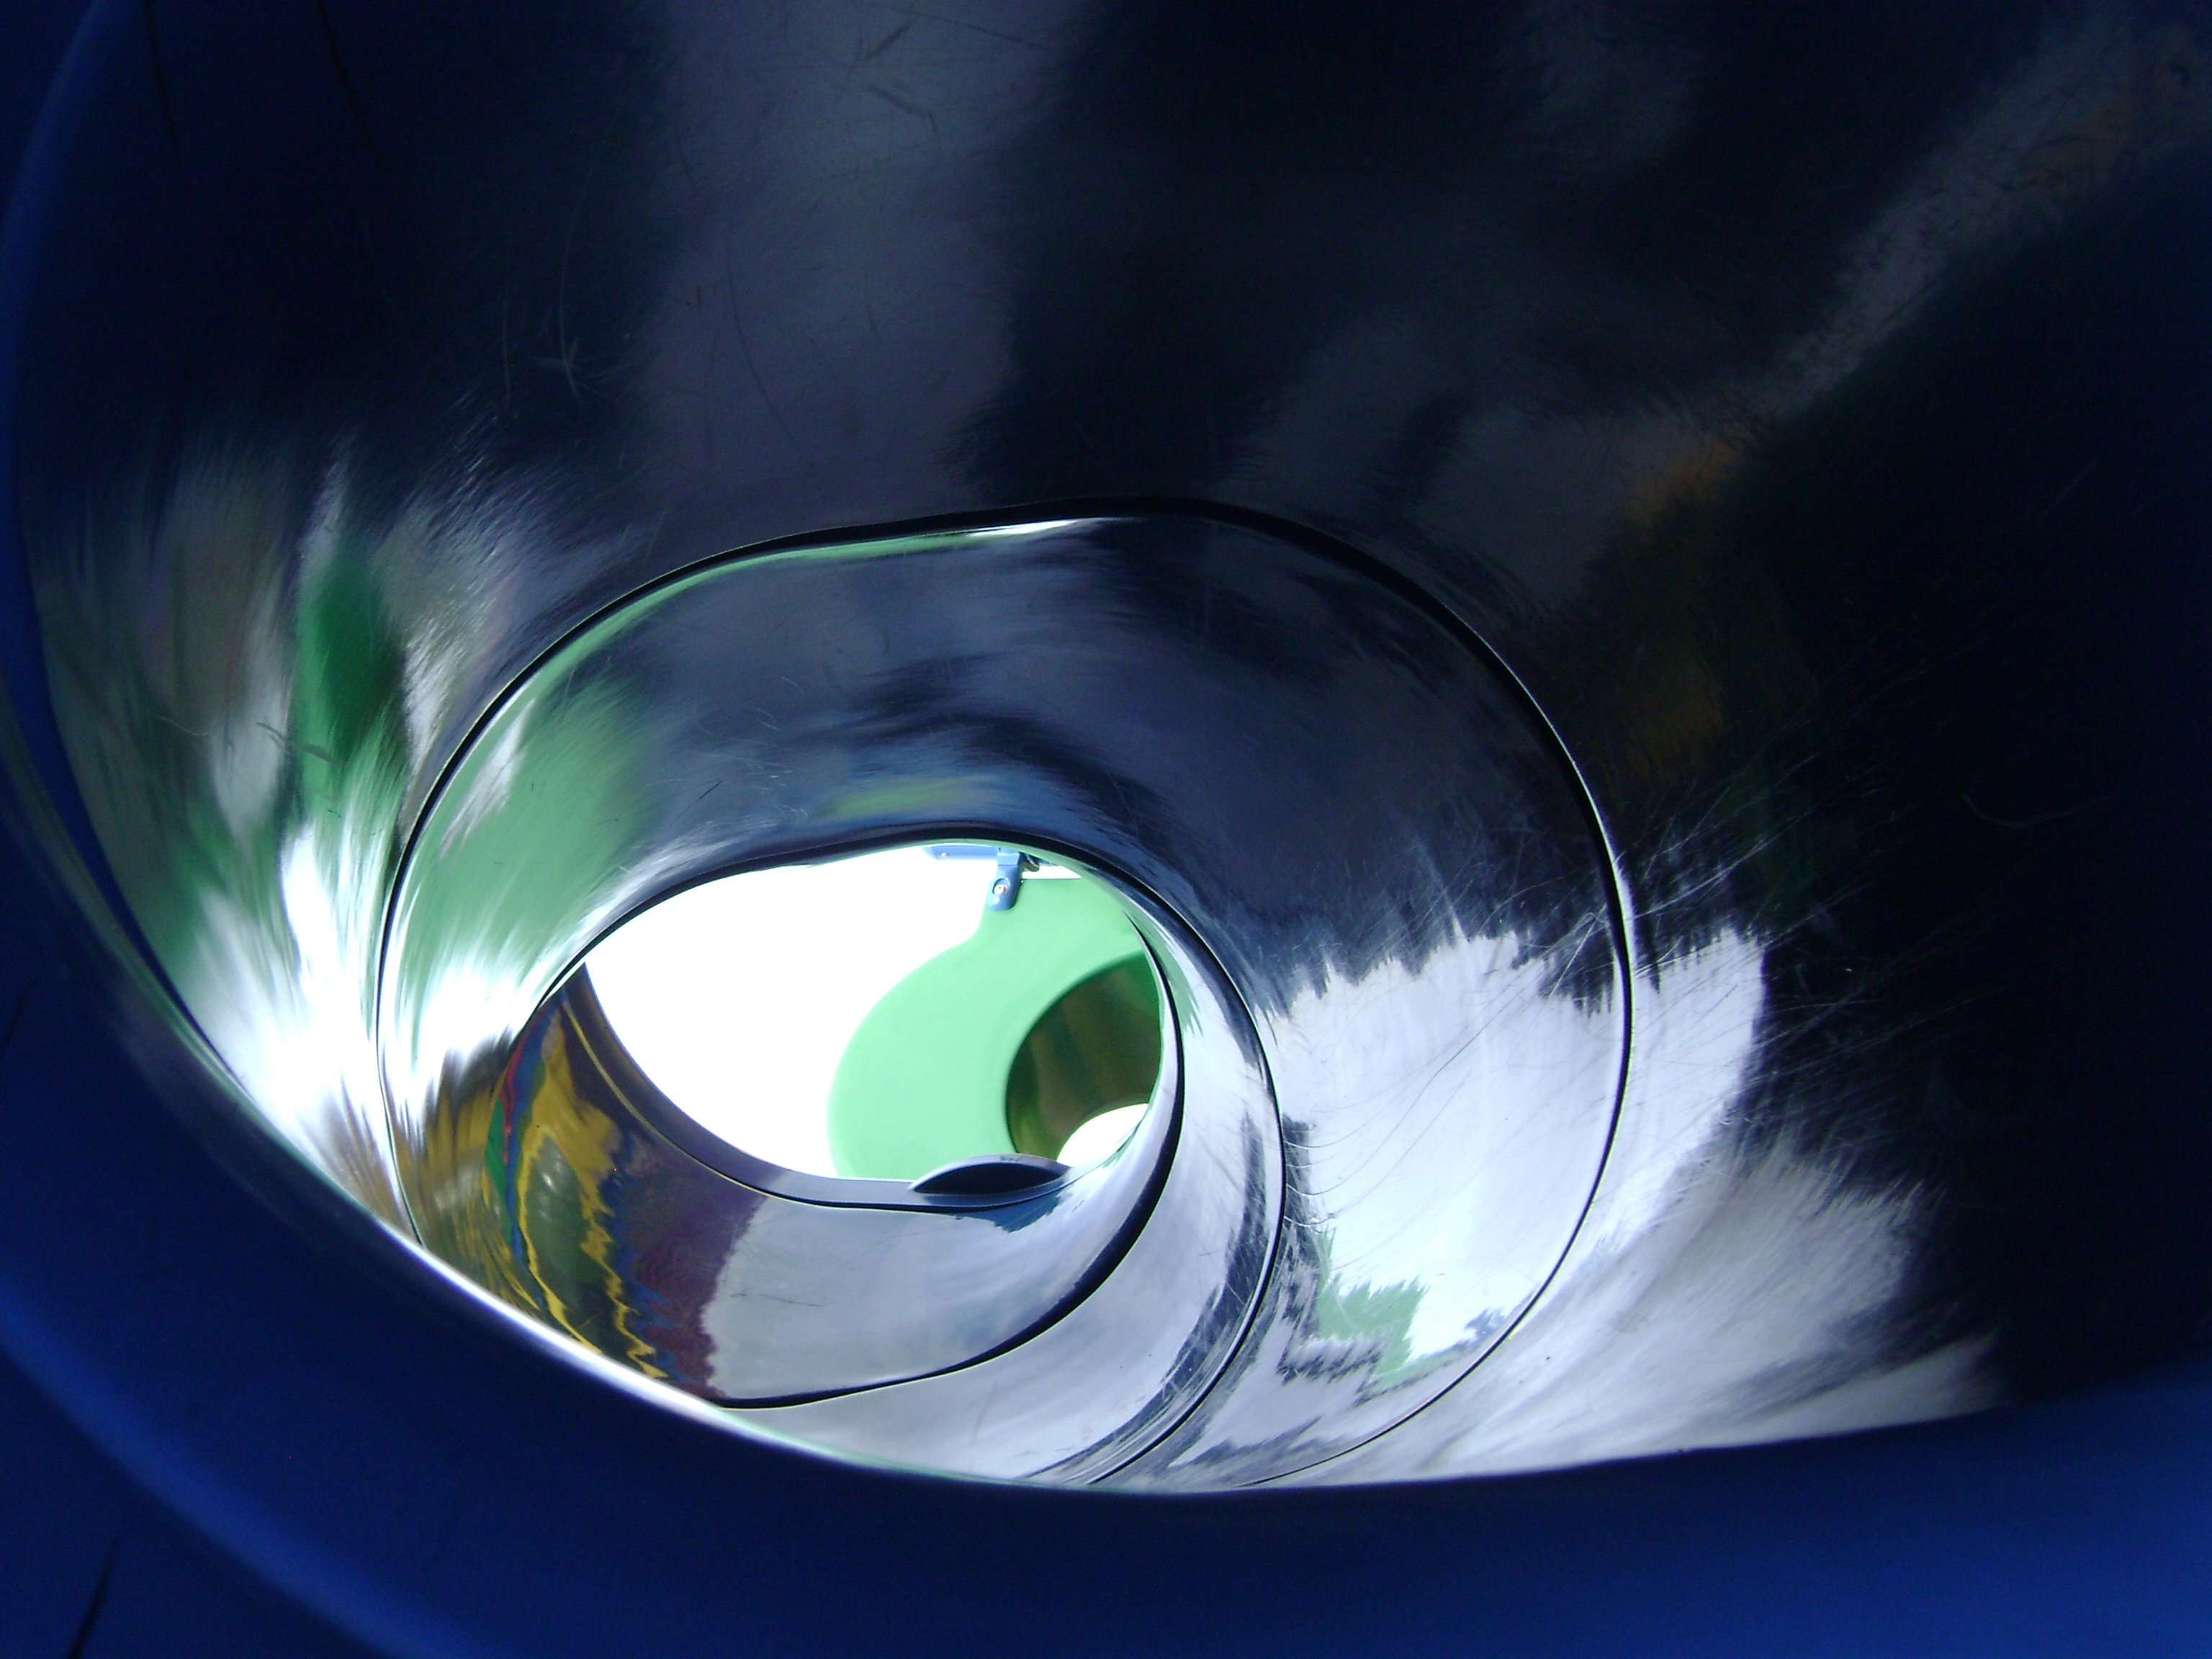 Up the slide, Blue, Plastic, Playgrounds, Reflection, HQ Photo